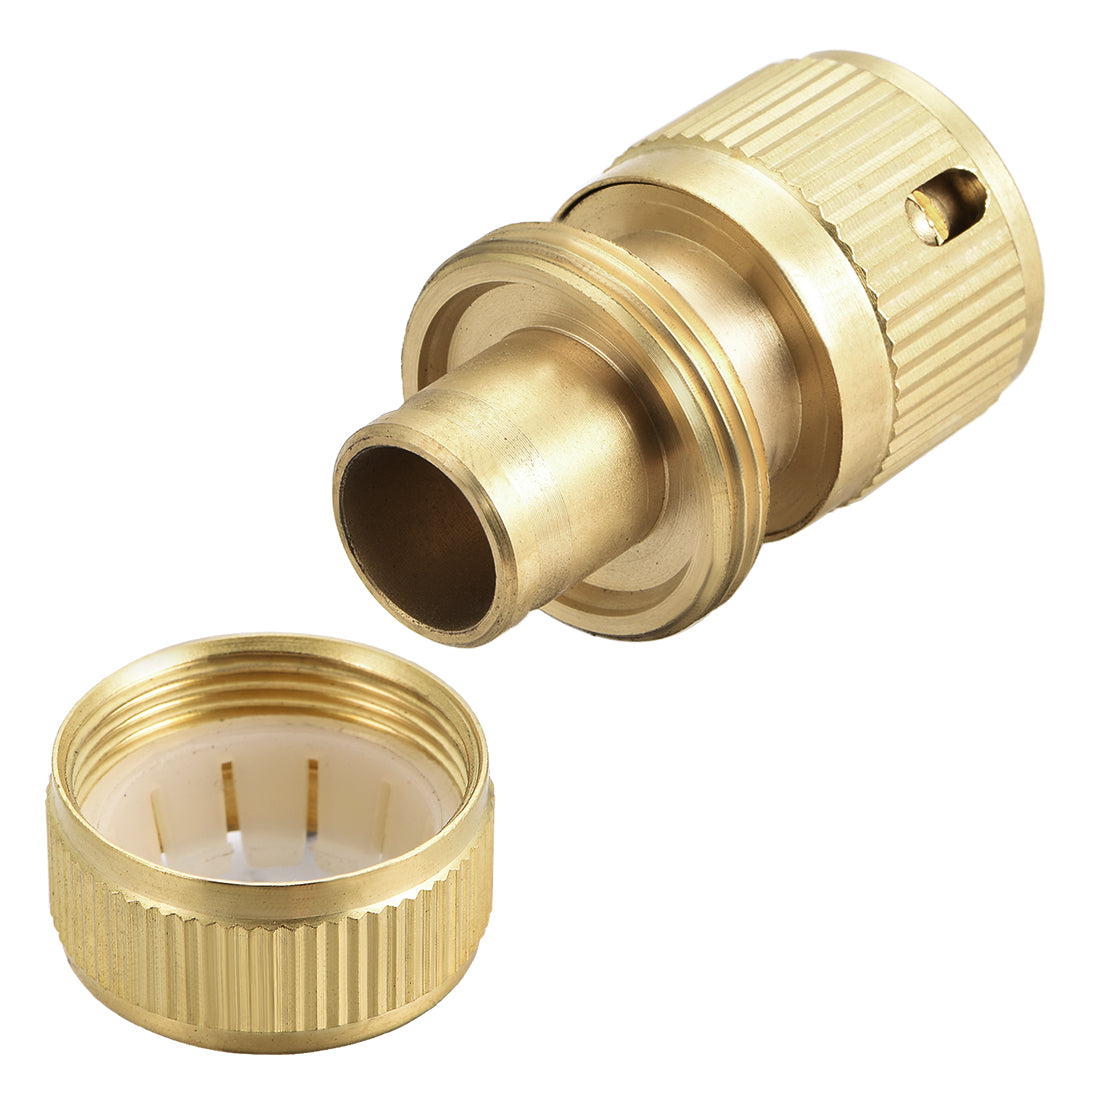 uxcell Uxcell 5/8" Brass Quick Connectors Adapters Garden Hose   Fittings 2pcs